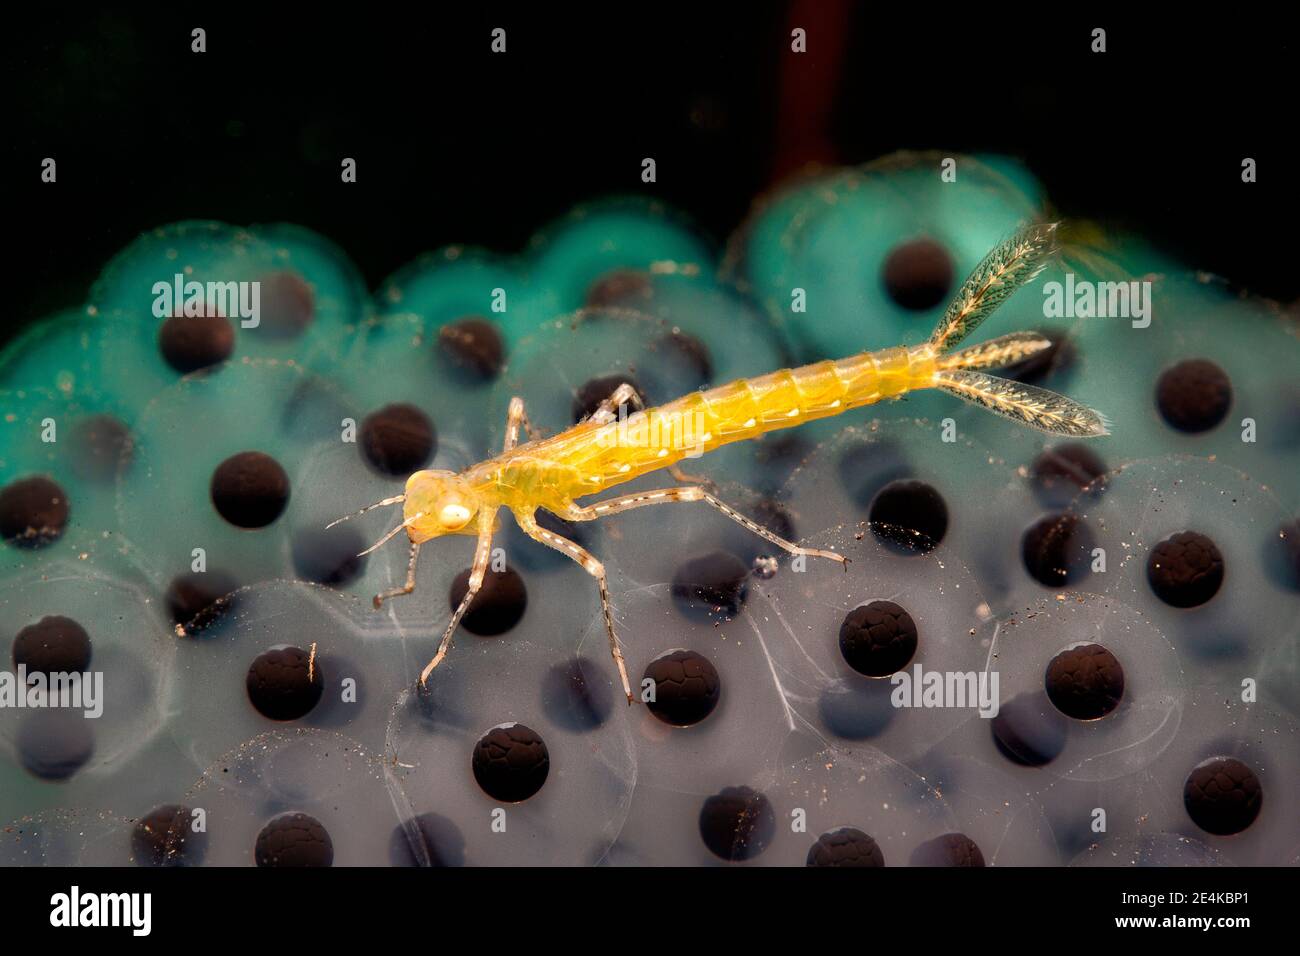 Underwater view of yellow insect crawling on tadpoles Stock Photo